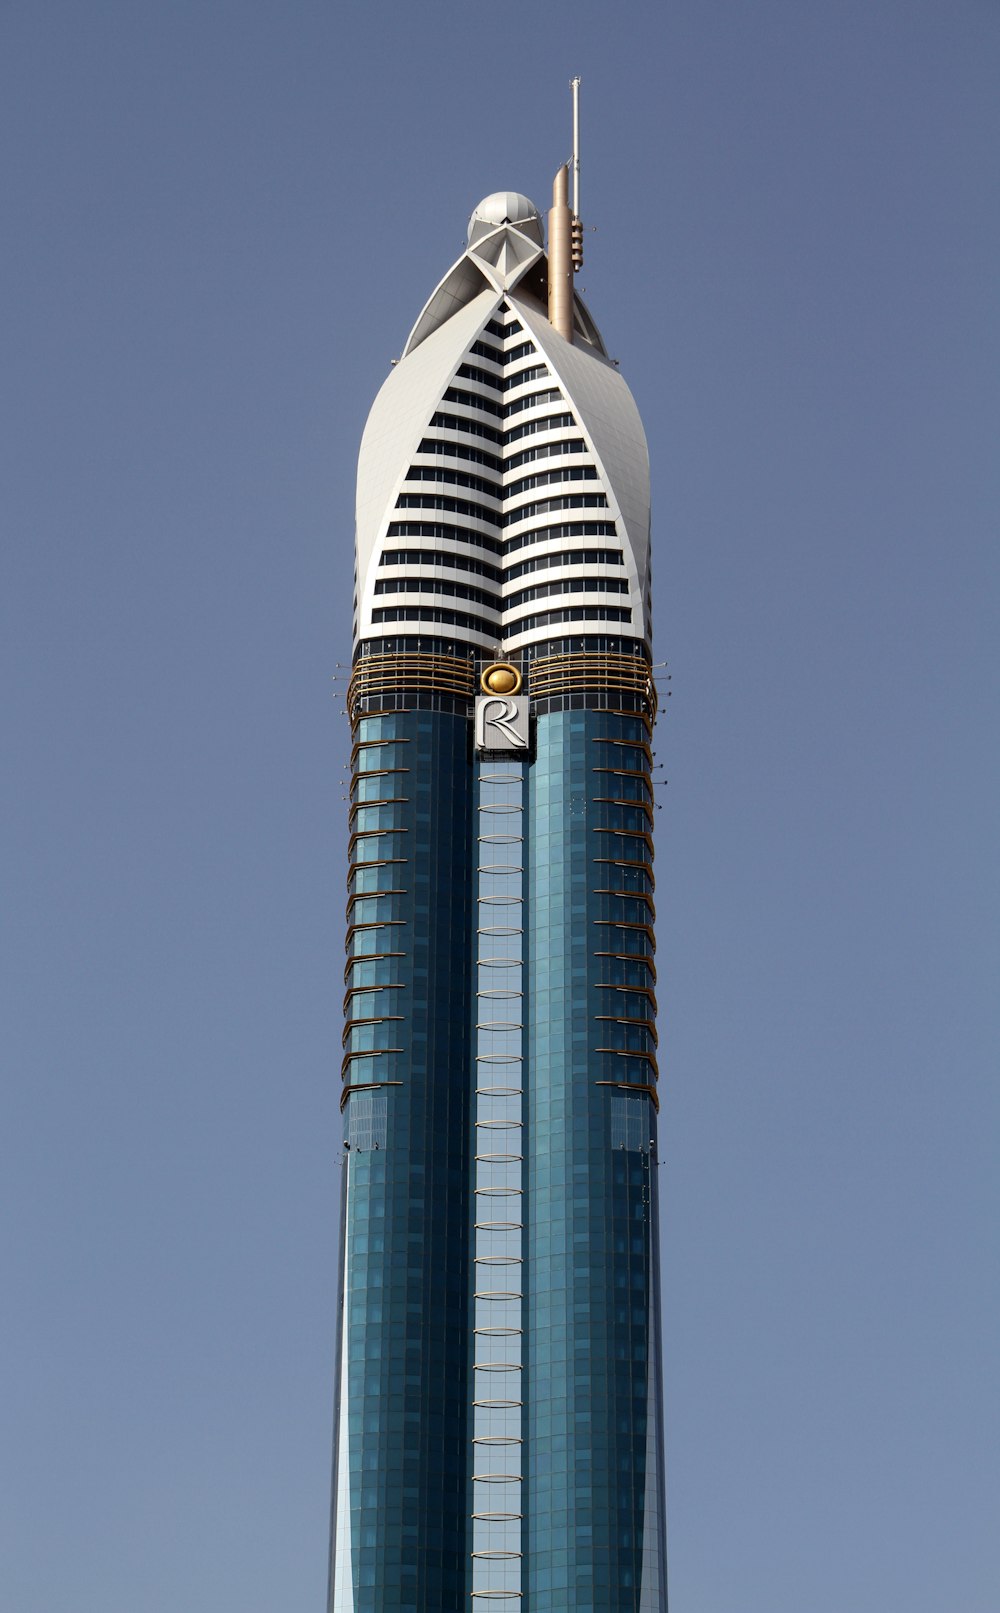 white and blue tower under blue sky during daytime